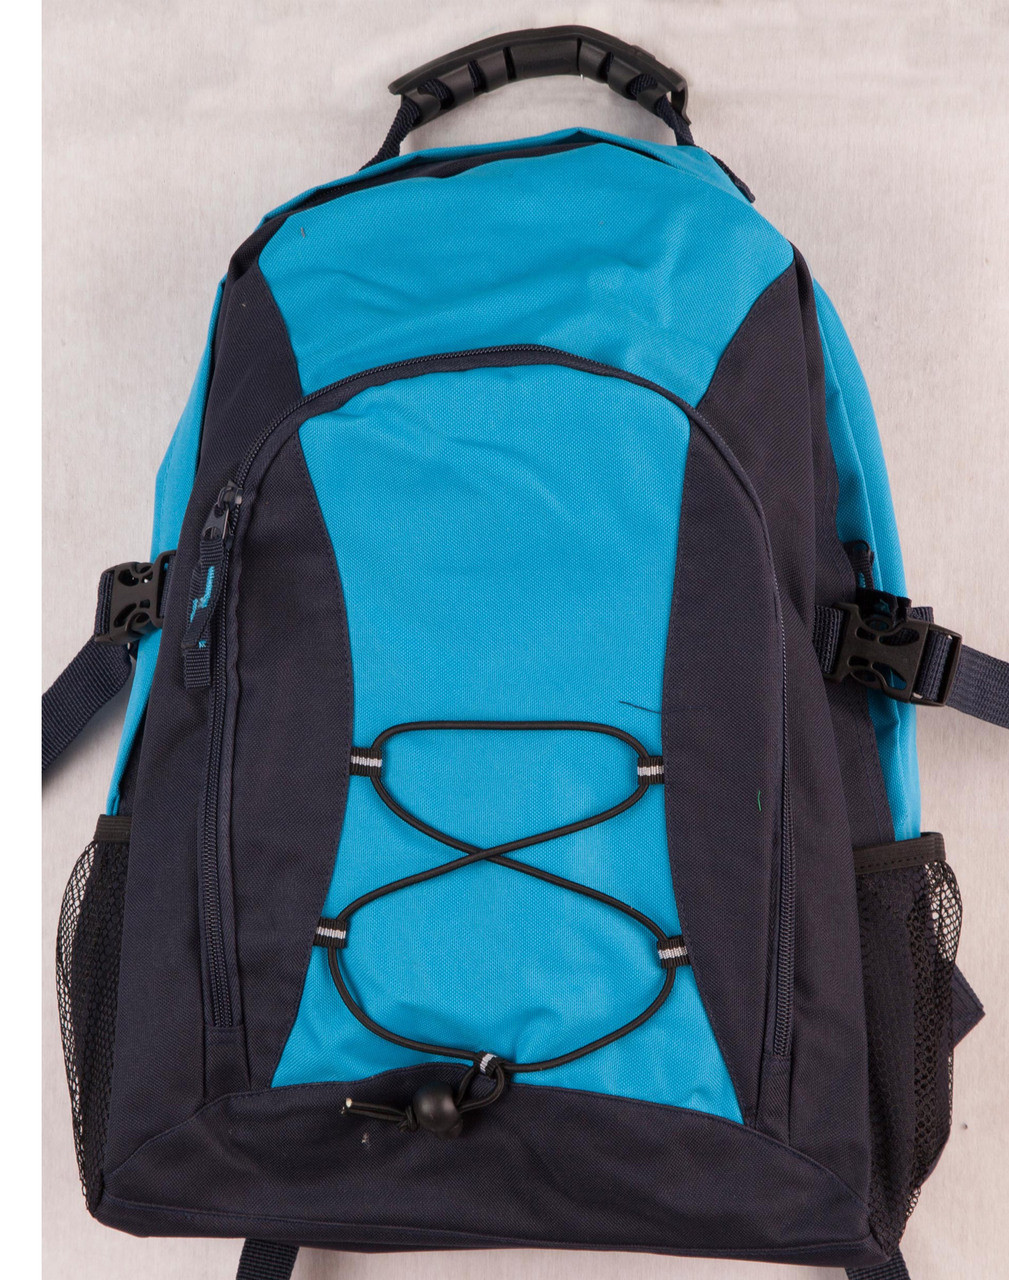 Padded backpack with bungee cord | wholesale plain bags & backpacks